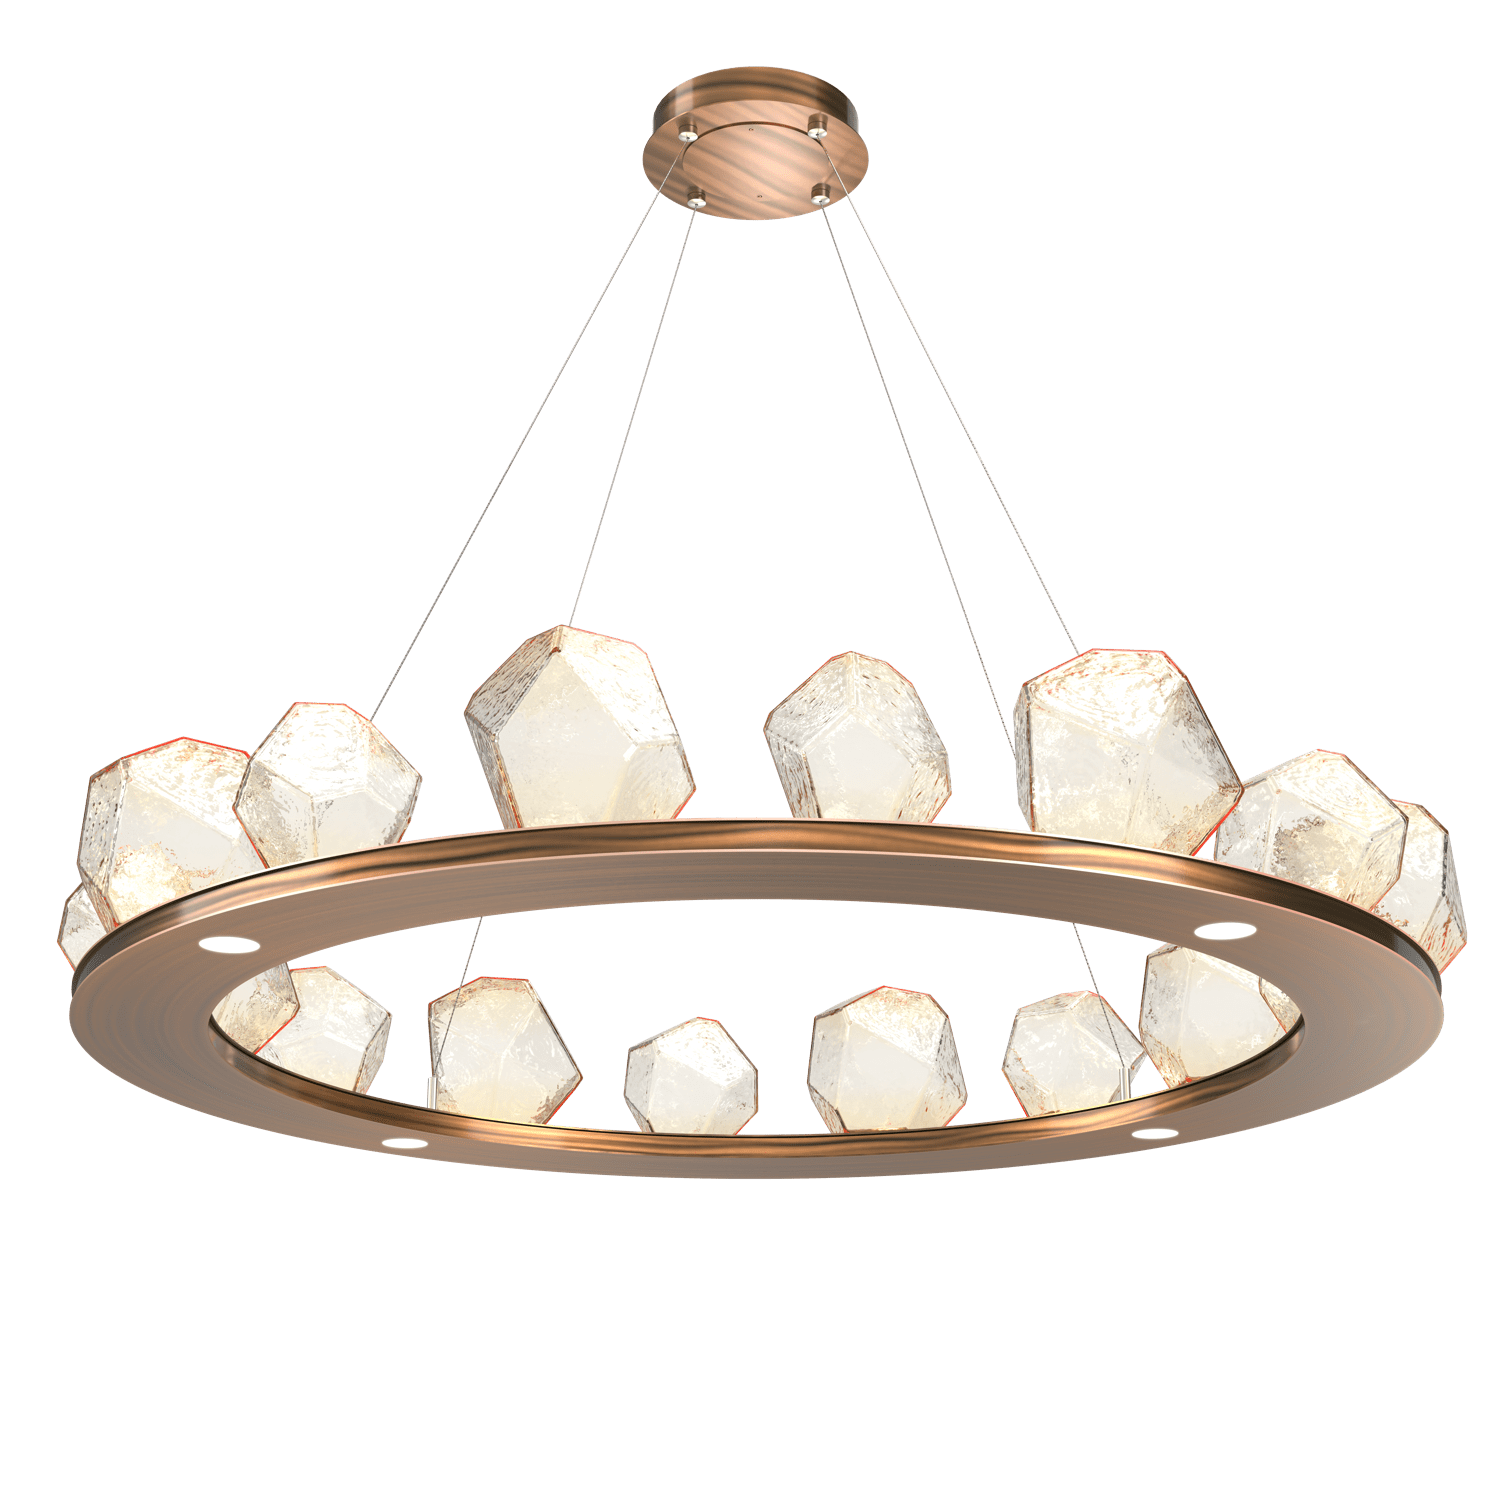 CHB0039-0D-RB-A-Hammerton-Studio-Gem-48-inch-ring-chandelier-with-oil-rubbed-bronze-finish-and-amber-blown-glass-shades-and-LED-lamping